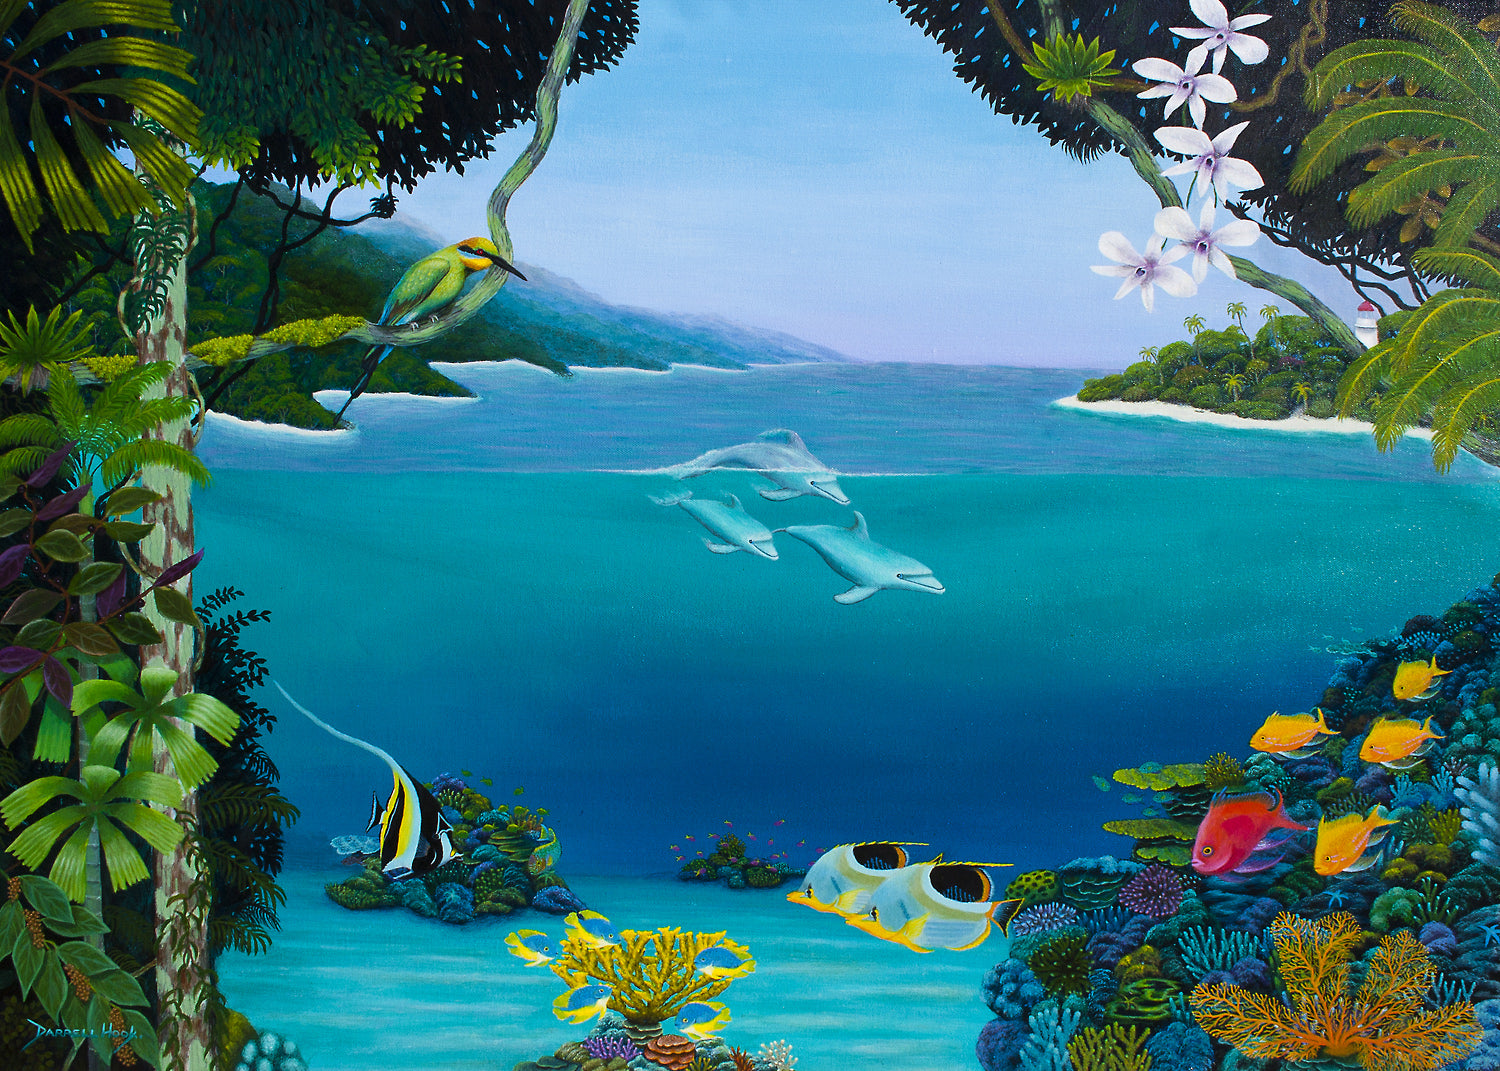 Paradise Found – Original Acrylic on Canvas by Darrell Hook – Reef Images